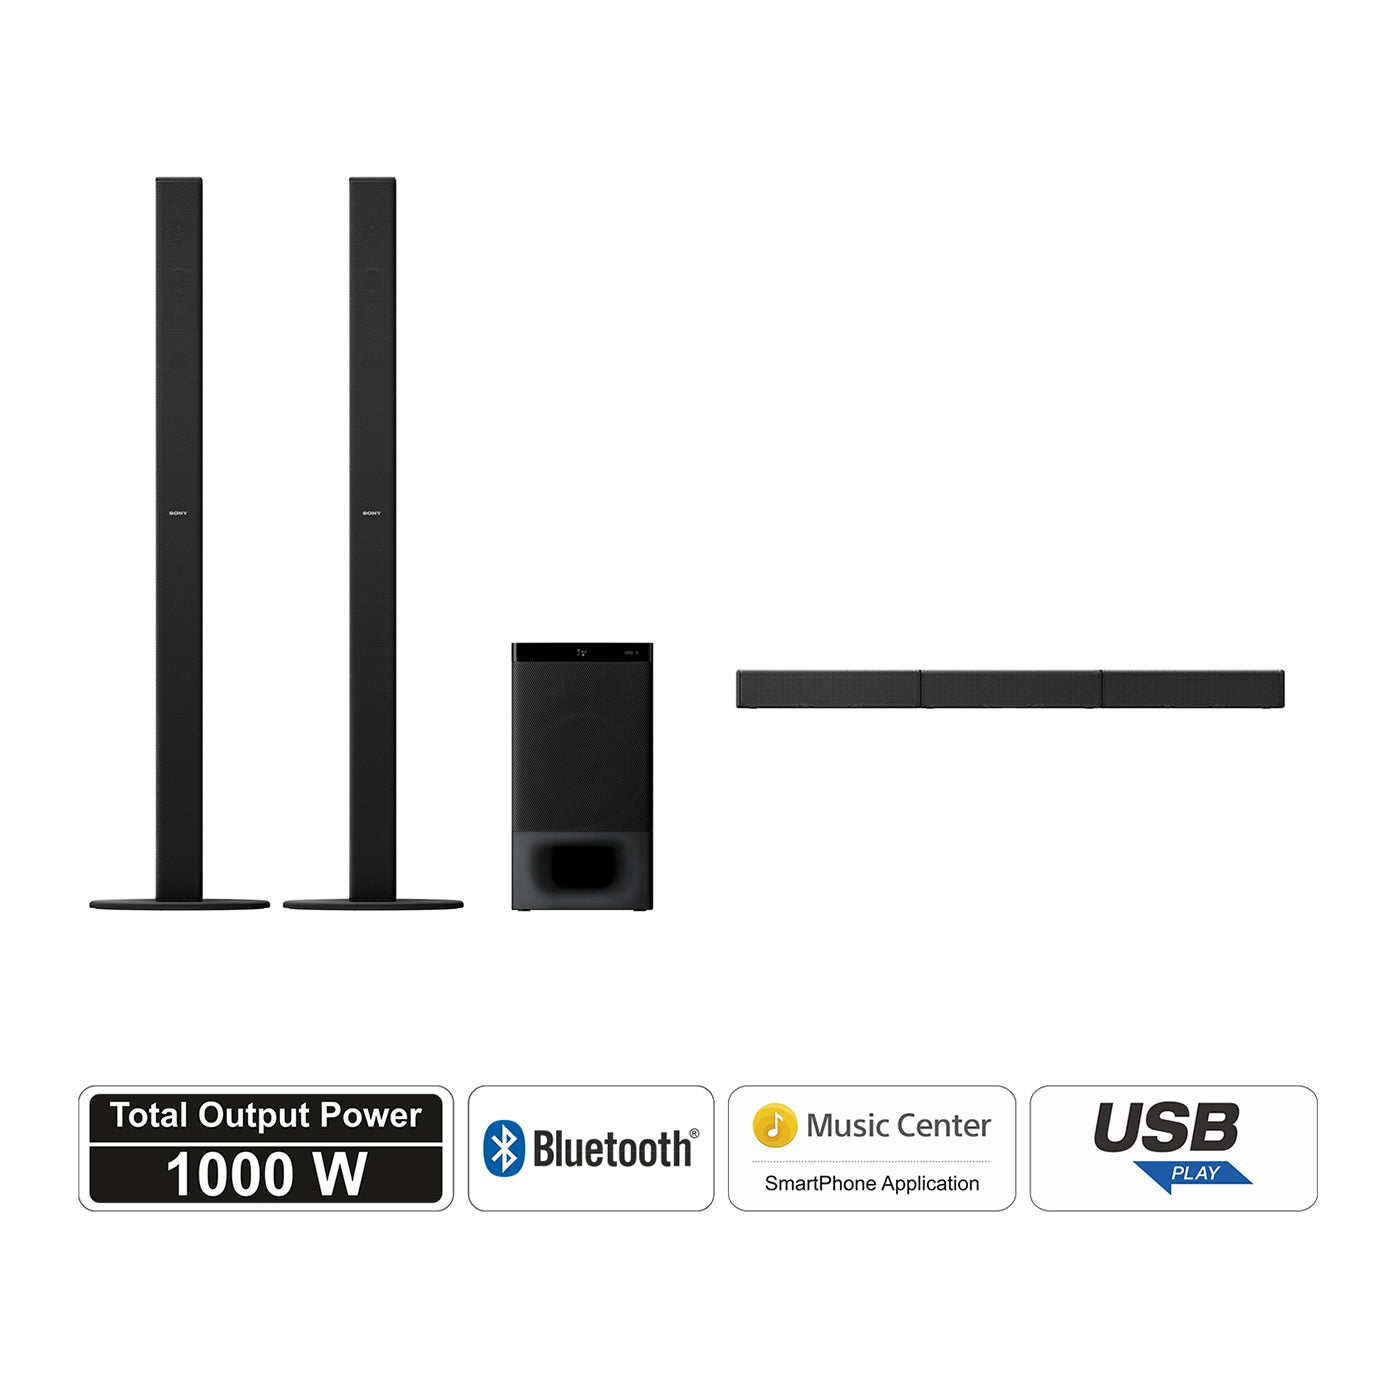 Sony HT-S700RF Real 5.1ch Dolby Audio Soundbar for TV with Tall boy Rear Speakers & Subwoofer, 5.1ch Home Theatre System (1000W, Bluetooth & USB Connectivity,HDMI & Optical Connectitvity)